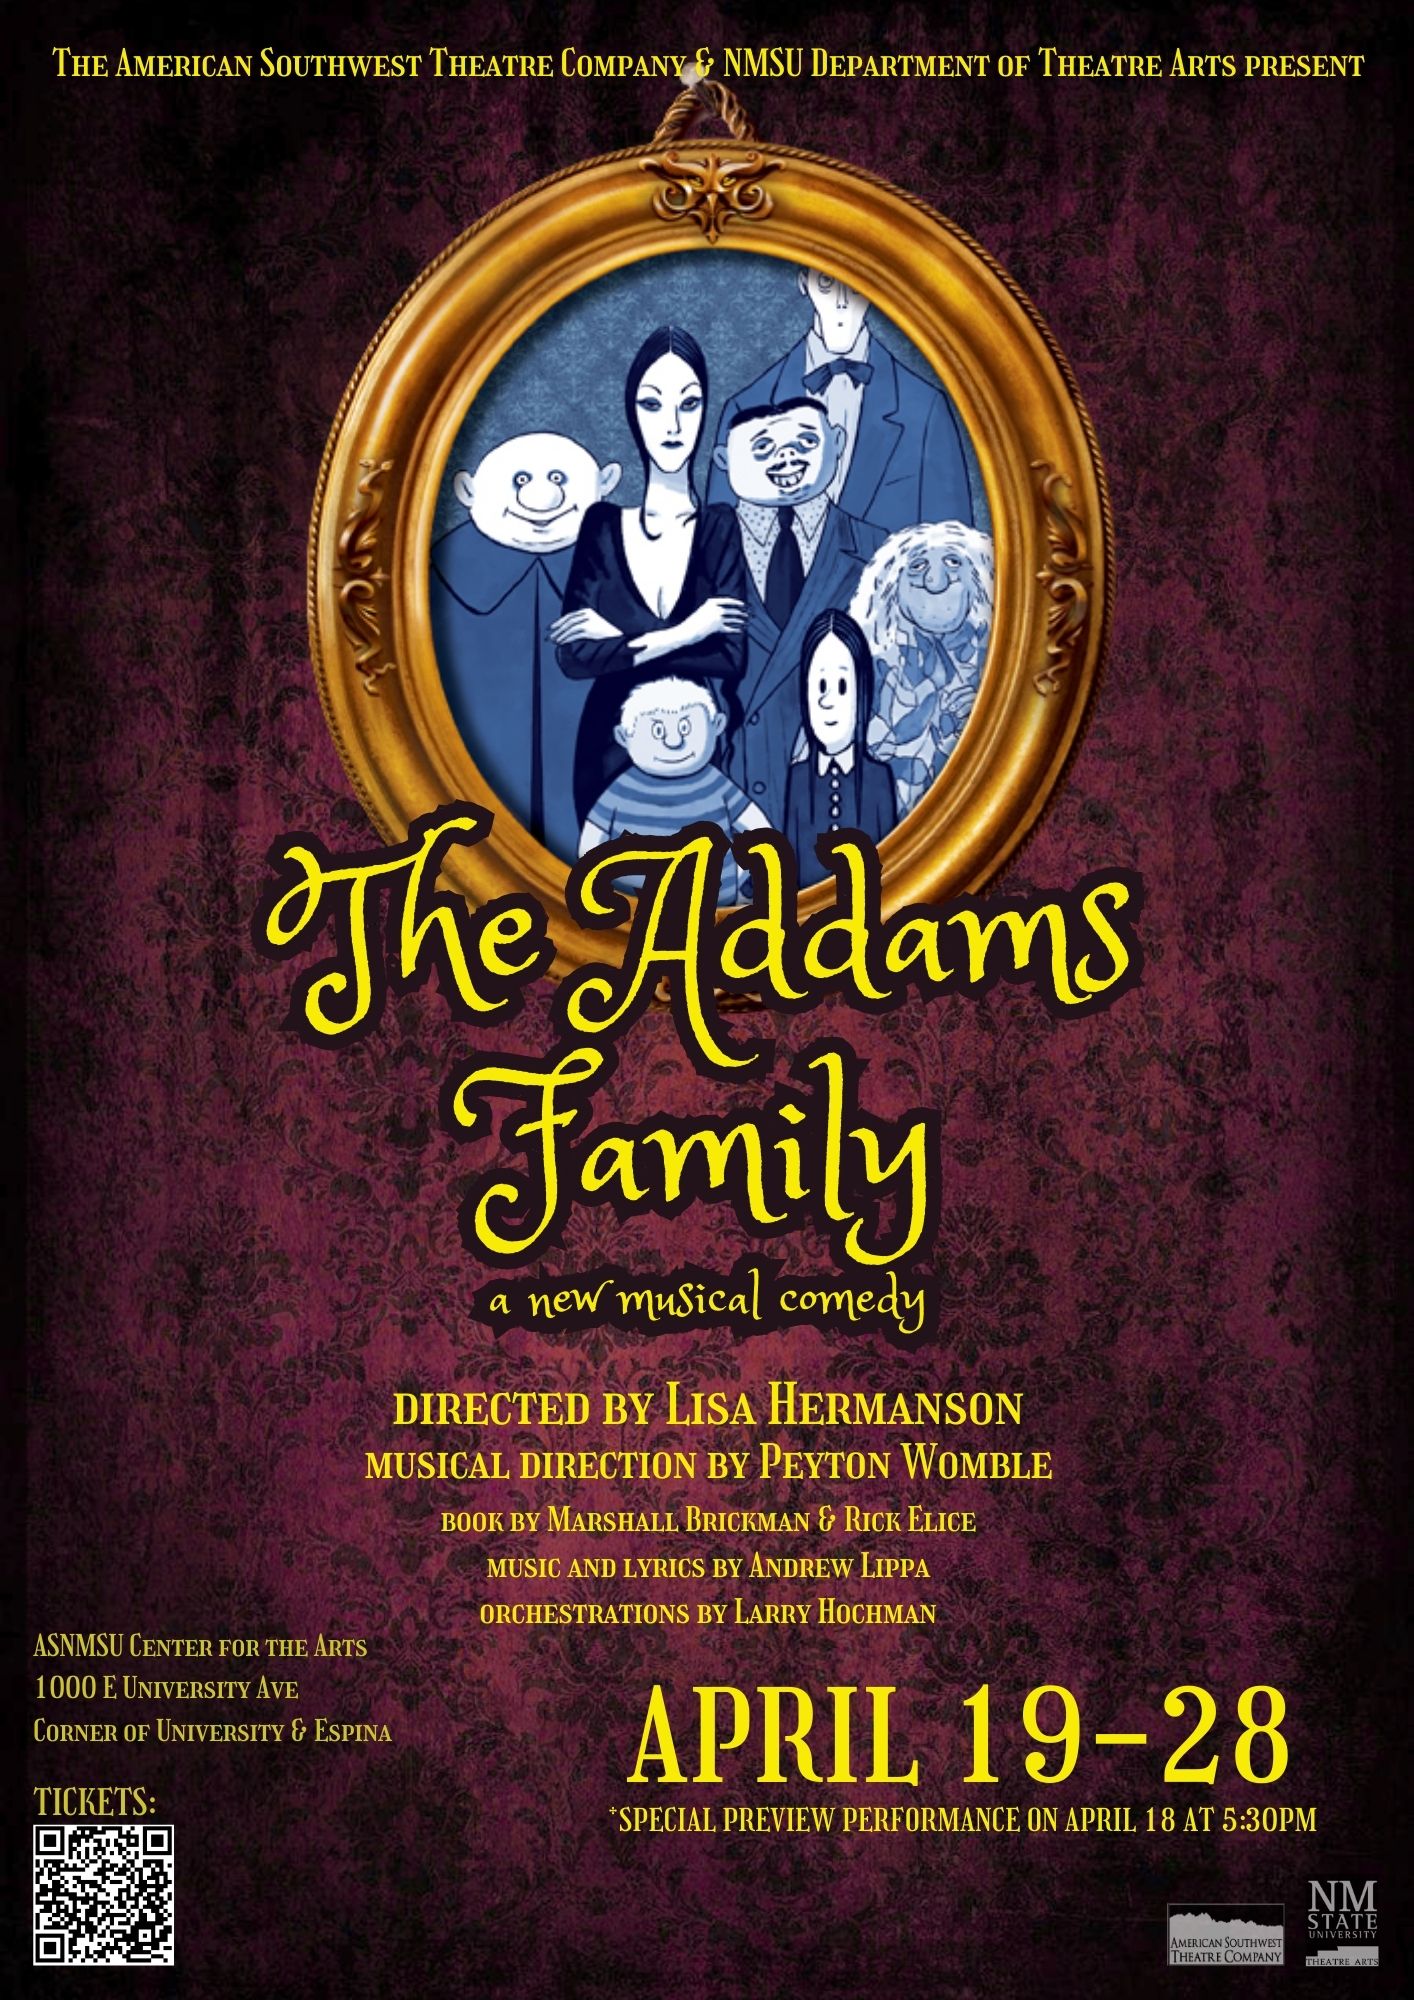 THE-ADDAMS-FAMILY-8.5x11-poster.jpg